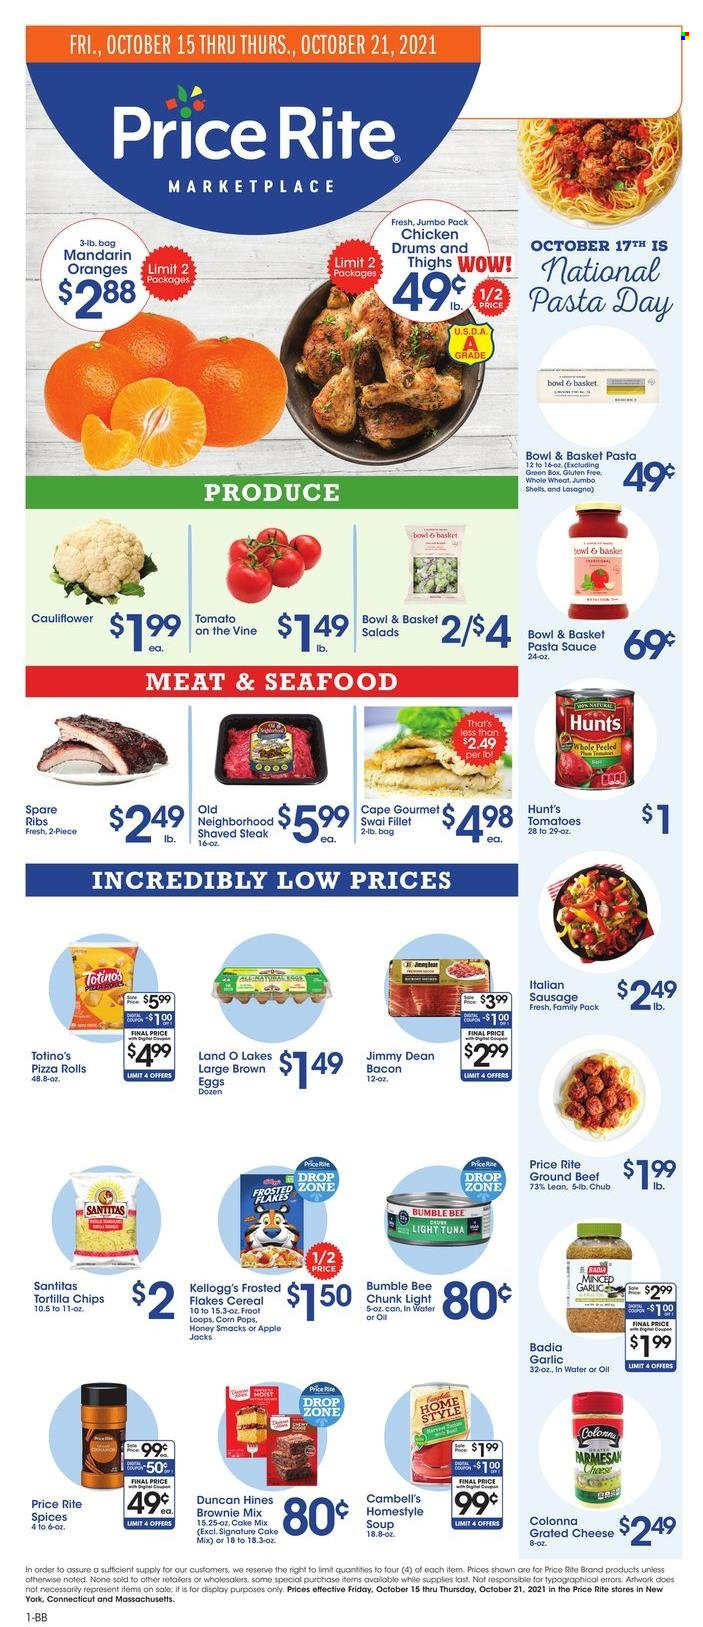 thumbnail - Price Rite Flyer - 10/15/2021 - 10/21/2021 - Sales products - pizza rolls, Bowl & Basket, brownie mix, cake mix, mandarines, oranges, tuna, seafood, swai fillet, pizza, pasta sauce, soup, Bumble Bee, sauce, Jimmy Dean, bacon, sausage, italian sausage, grated cheese, eggs, Kellogg's, tortilla chips, chips, light tuna, Badia, cereals, Frosted Flakes, Corn Pops, honey, Coca-Cola, beef meat, ground beef, steak, pork spare ribs. Page 1.